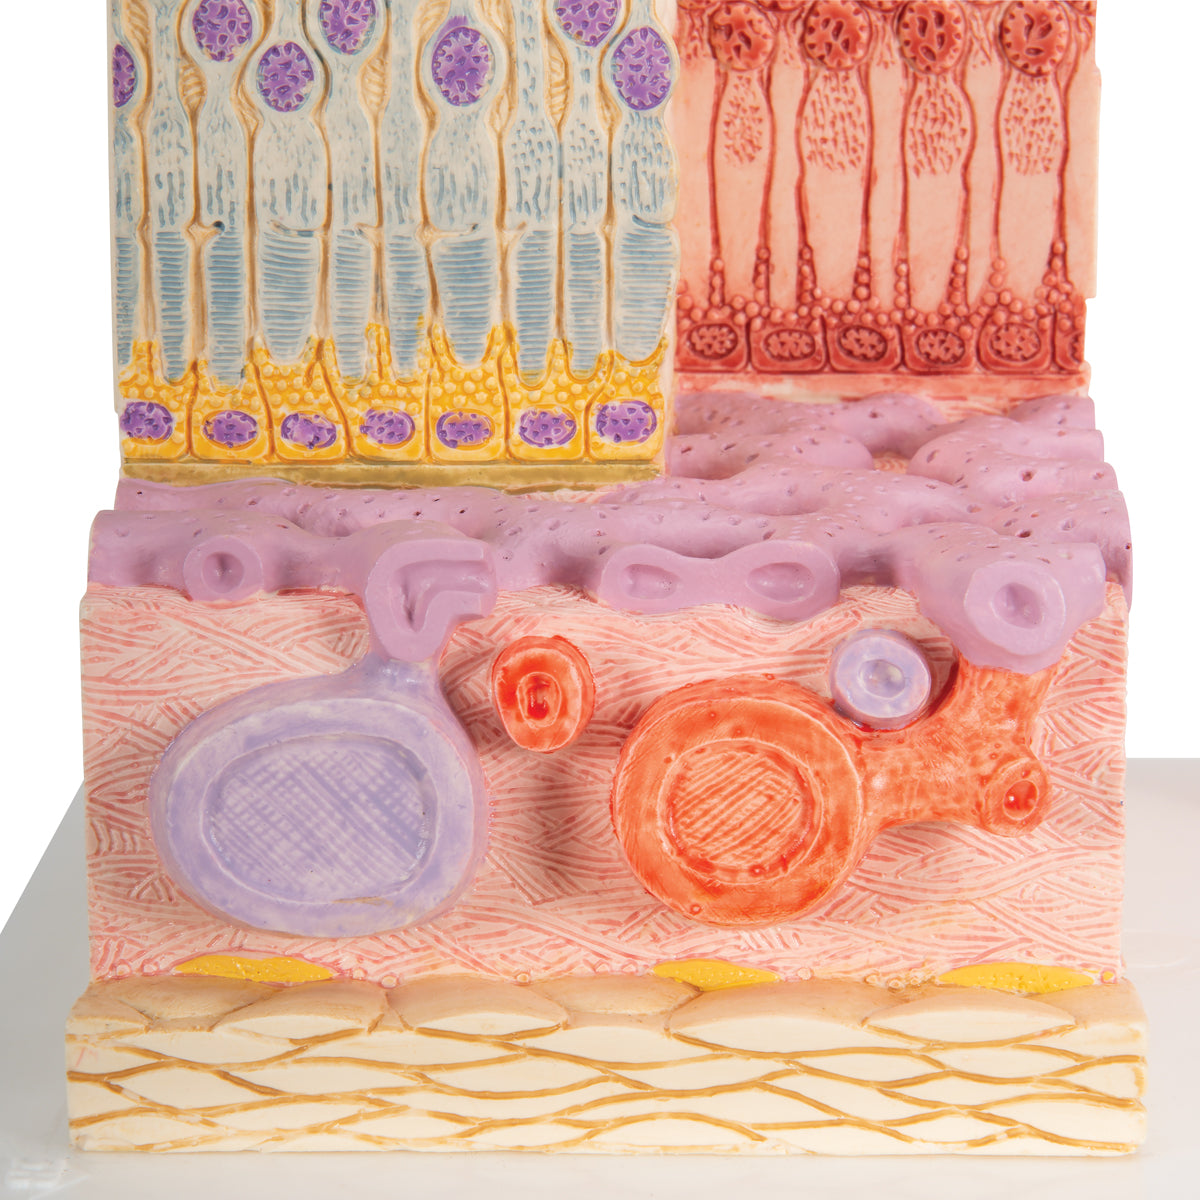 Detailed model of the cells in the eye's retina, choroid and sclera in a microscopic perspective